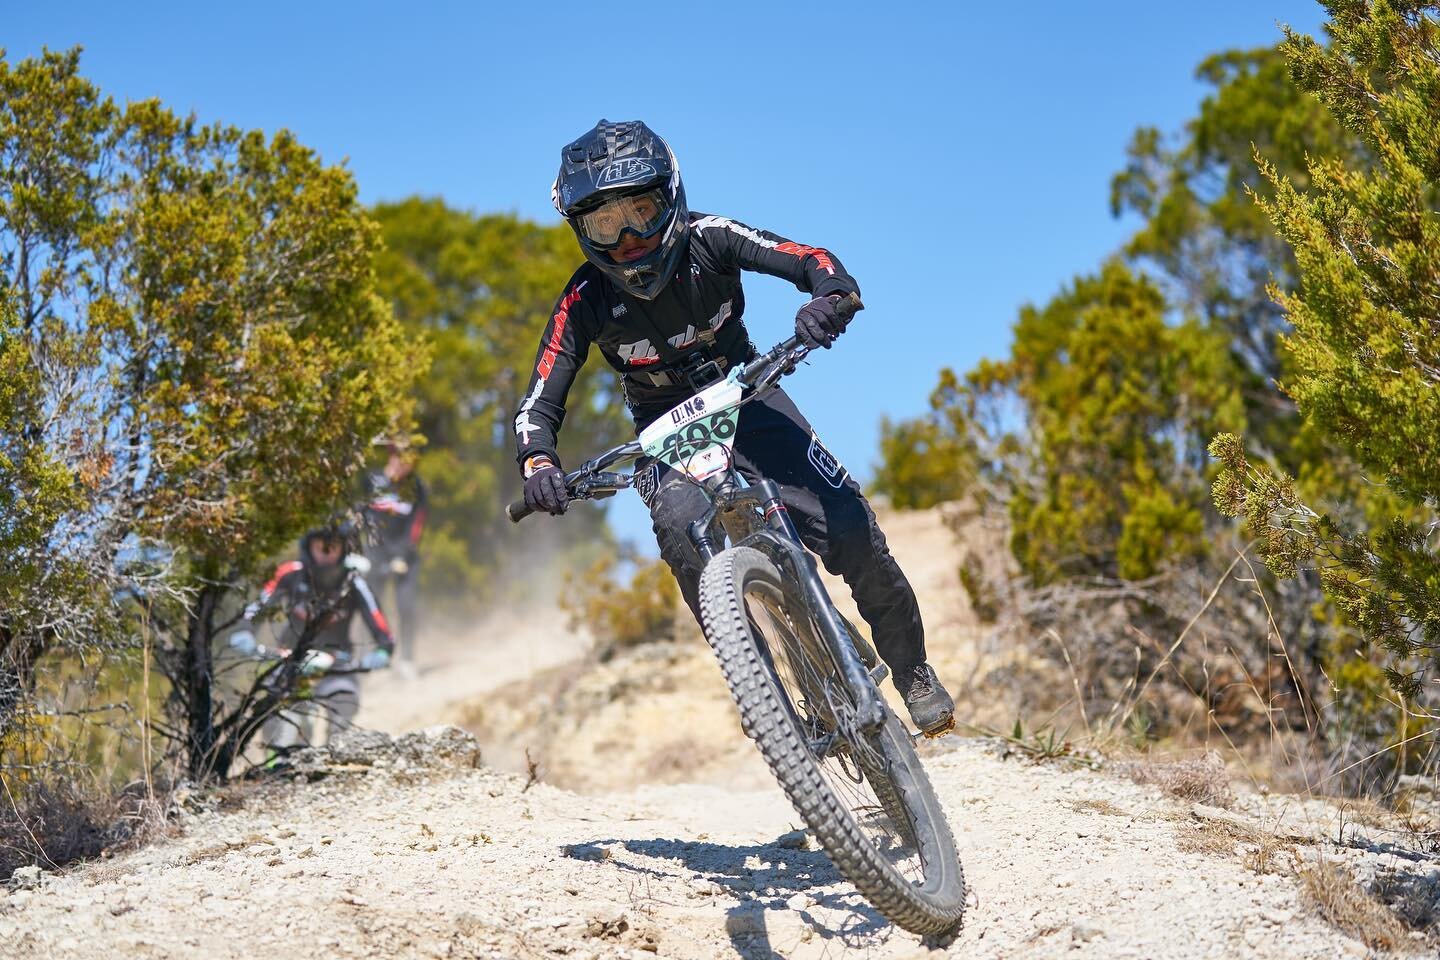 What a good time it was at Round 3 of the Southern Enduro Tour at Dinosaur Valley State Park for another rad, epic and tough- Dino Enduro! Good job Everyone and thank you for continuing to come out and rally with us!&nbsp;

Here are the links to the 